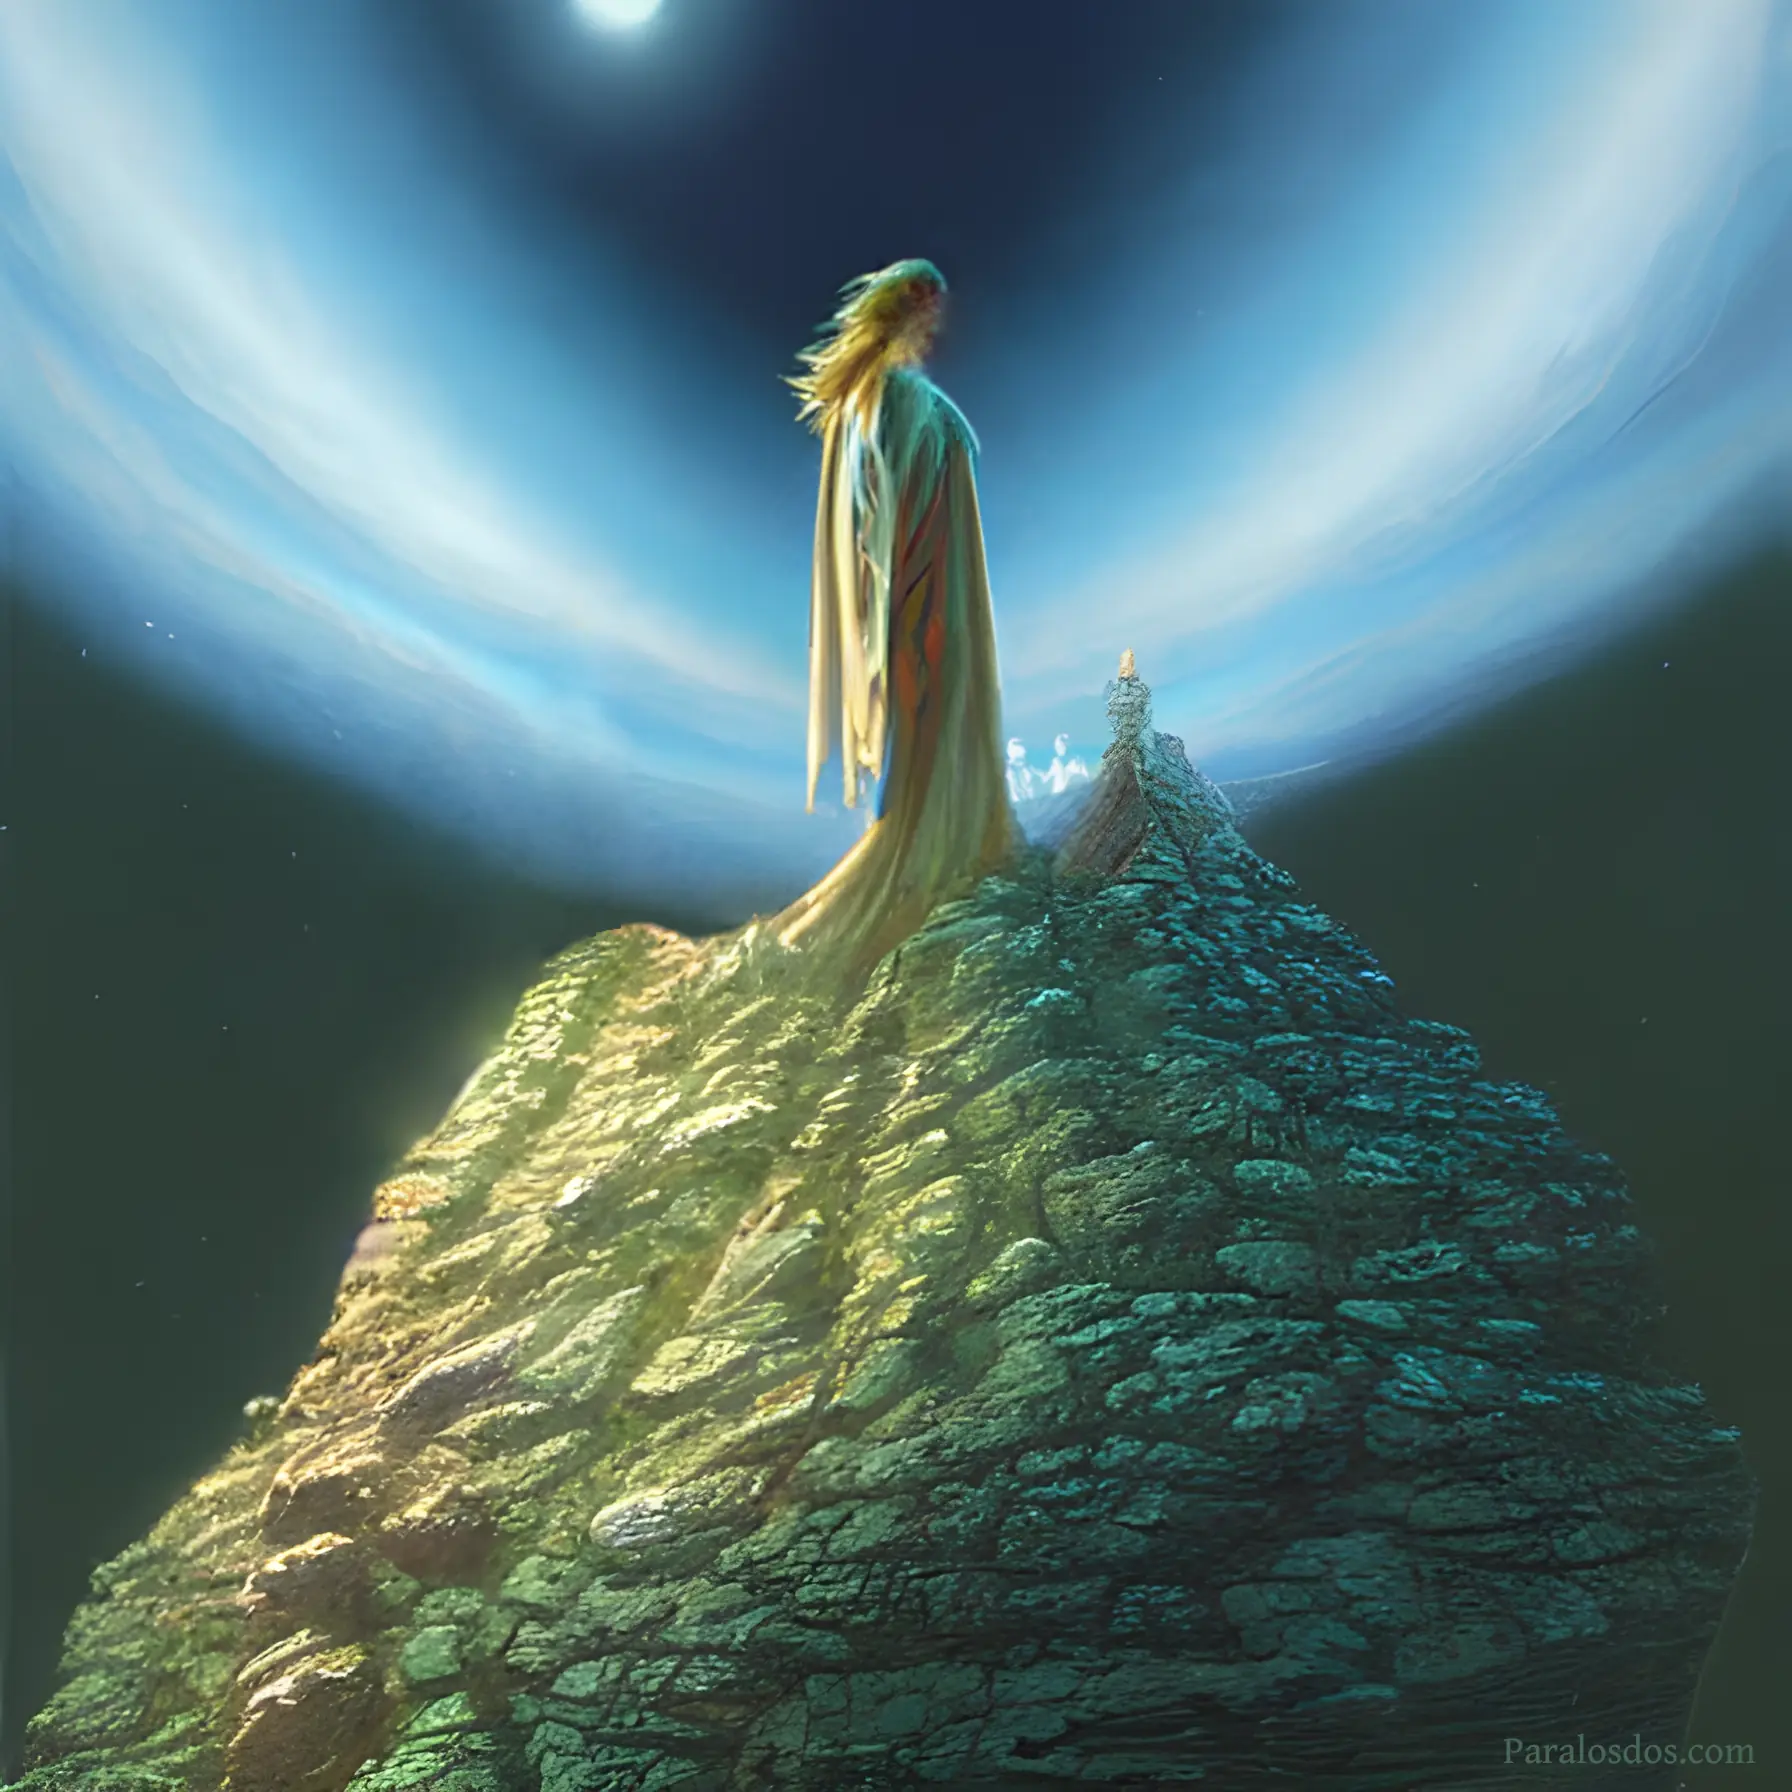 A fantastical artistic rendering of a figure atop a mountain staring up at other worlds.